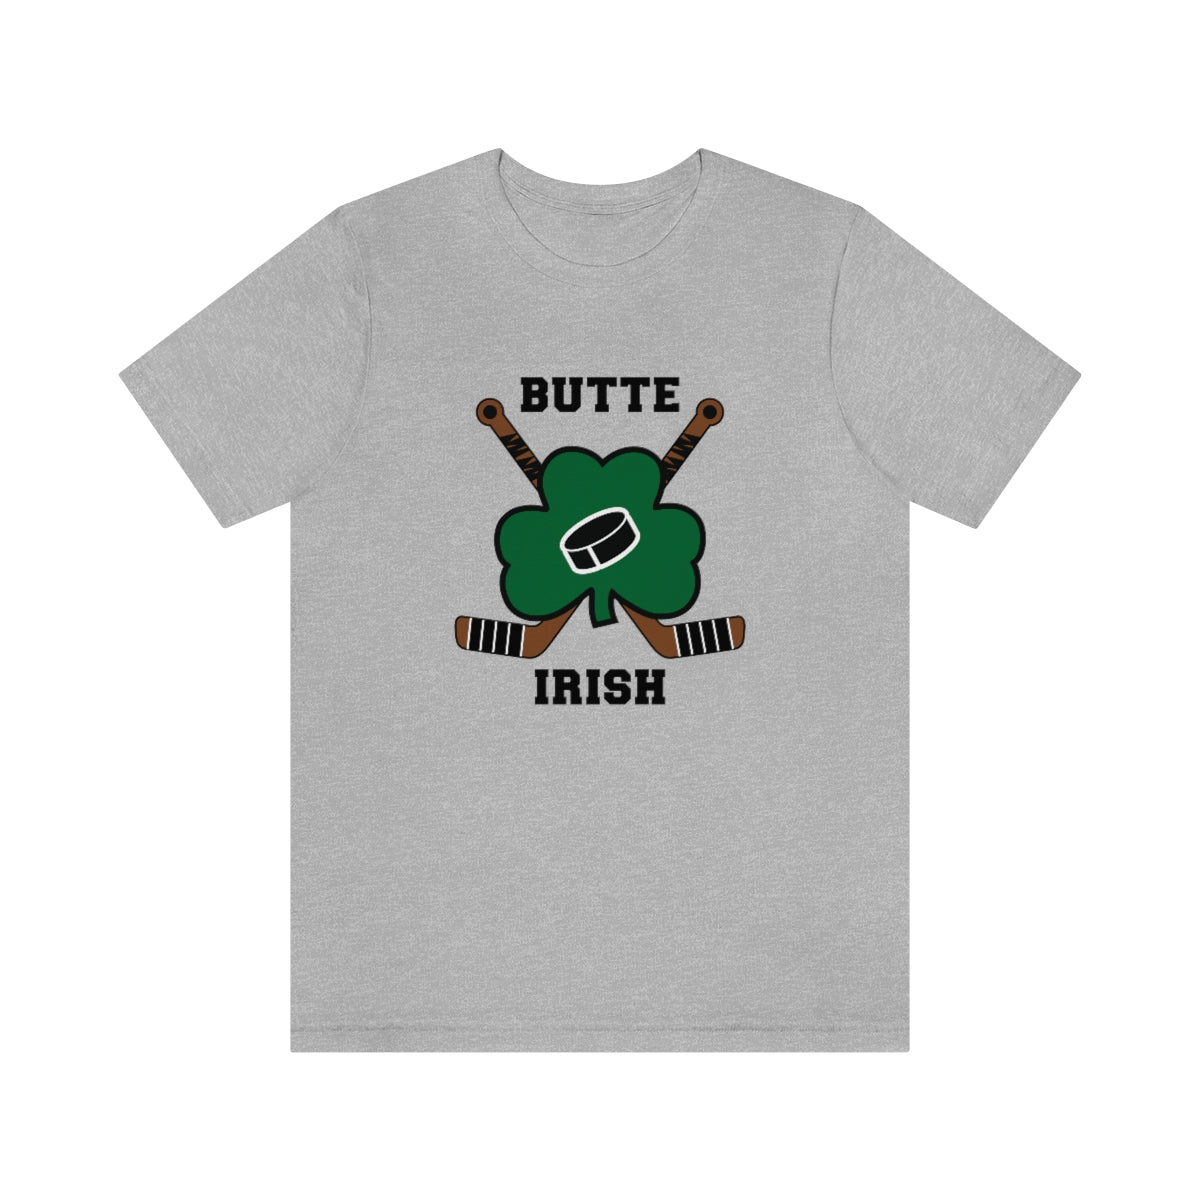 Stitches, Shirts, St Patricks Day Special Edition Chicago Cubs Jersey